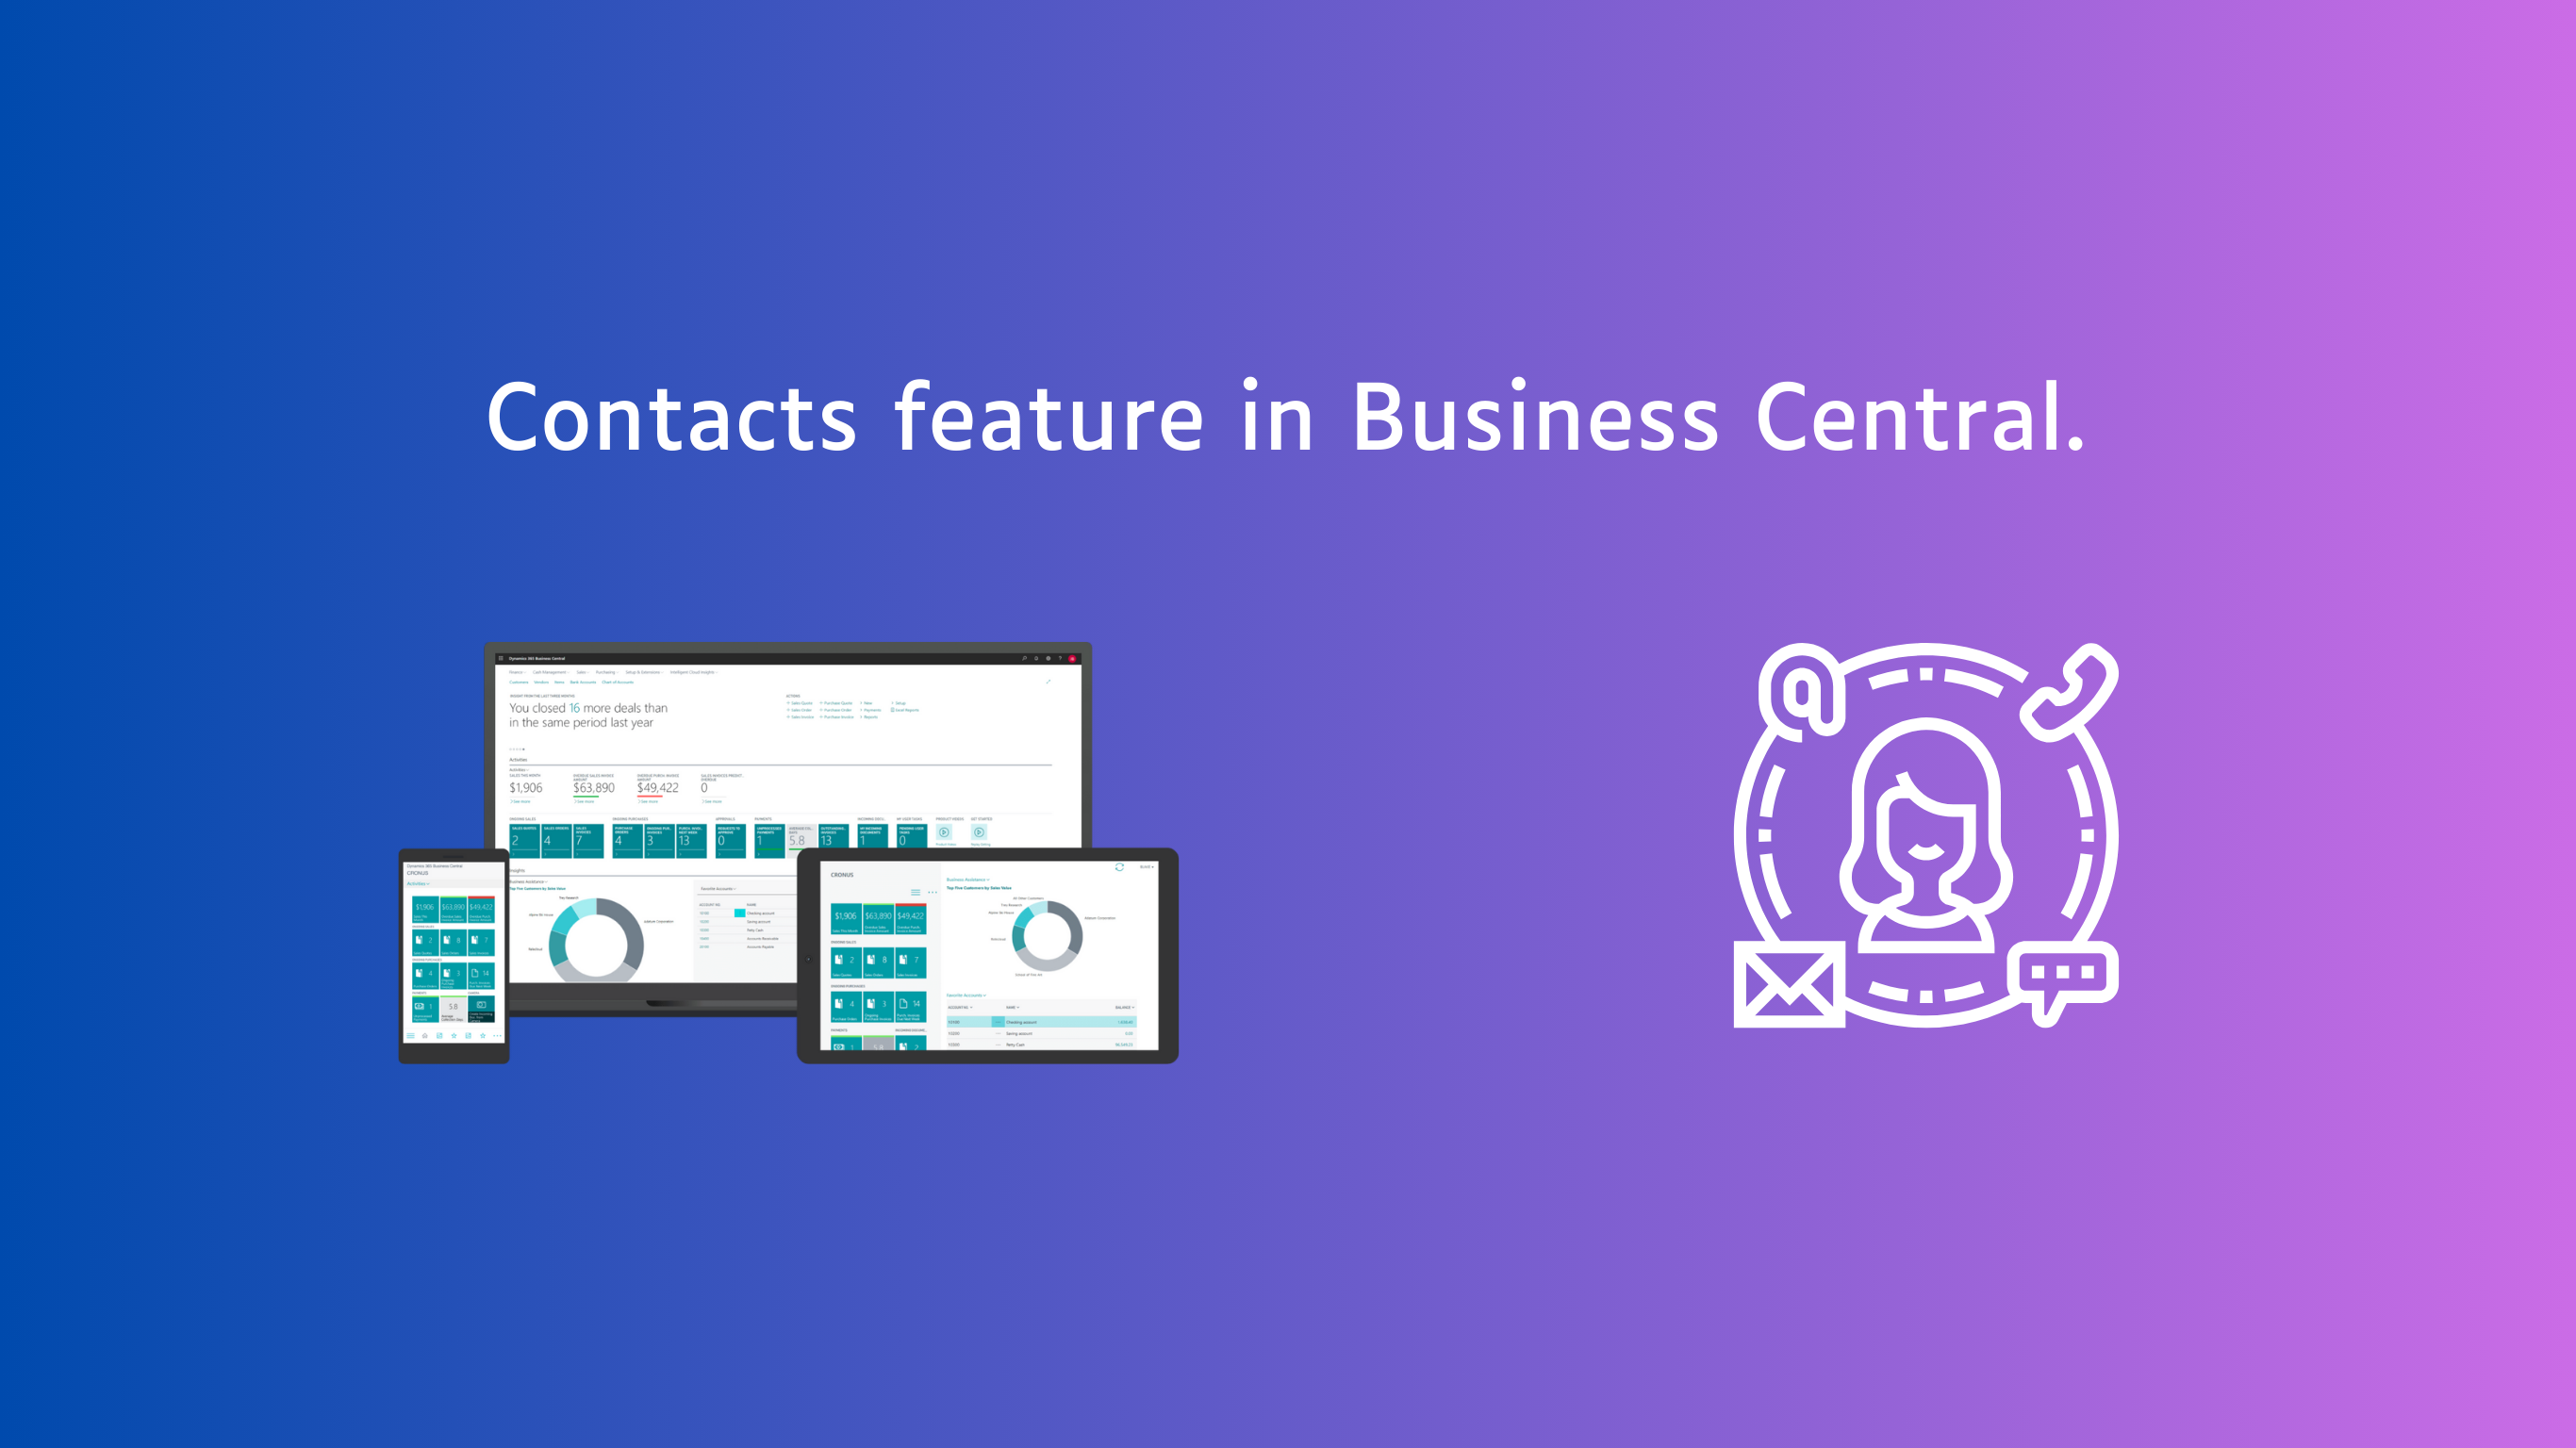 How to use Contacts feature in D 365 Business Central?